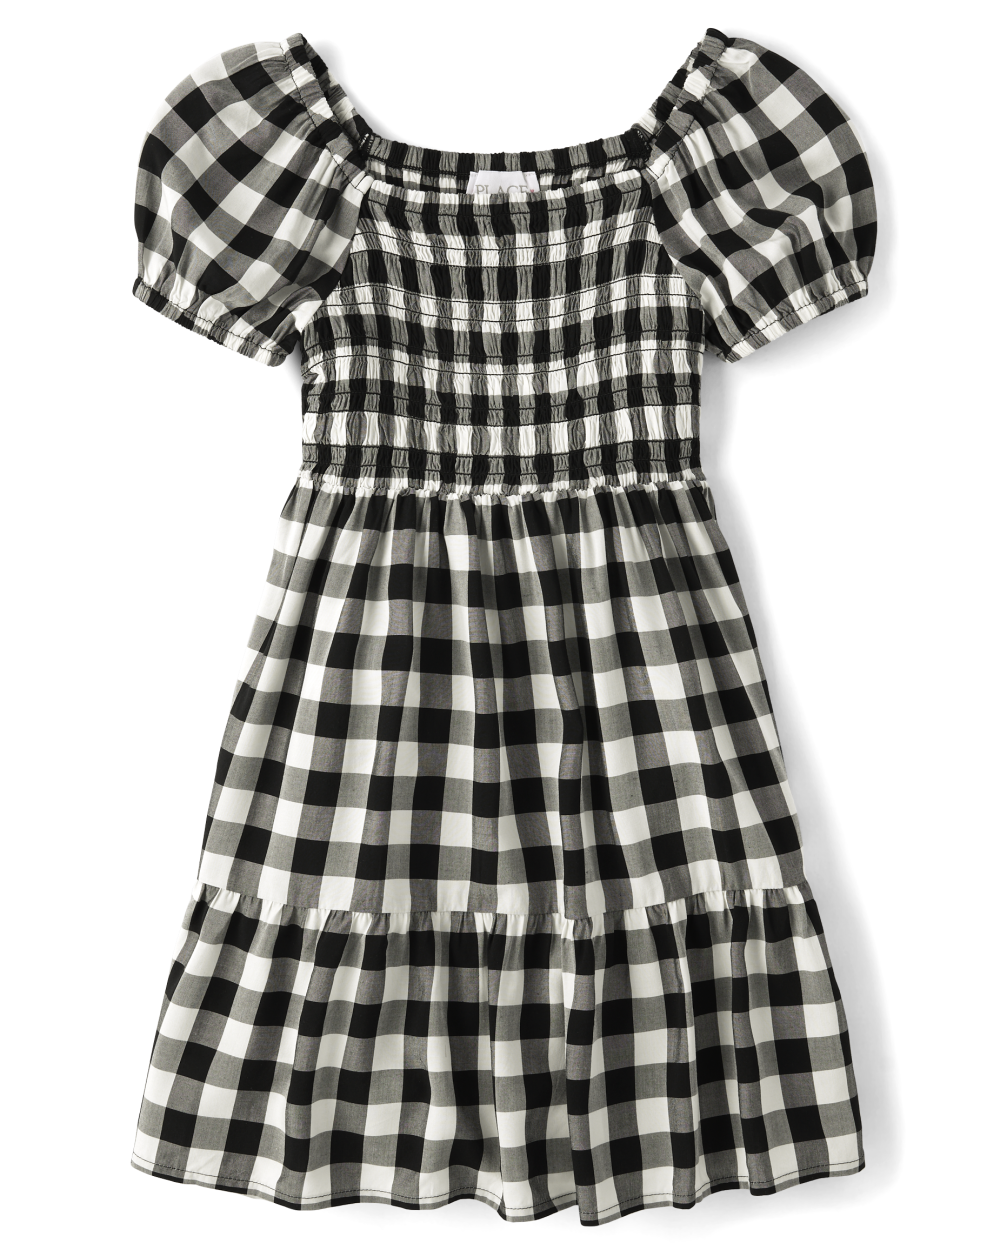 Girls Above the Knee Checkered Gingham Print Puff Sleeves Short Sleeves Sleeves Smocked Square Neck Rayon Dress With Ruffles